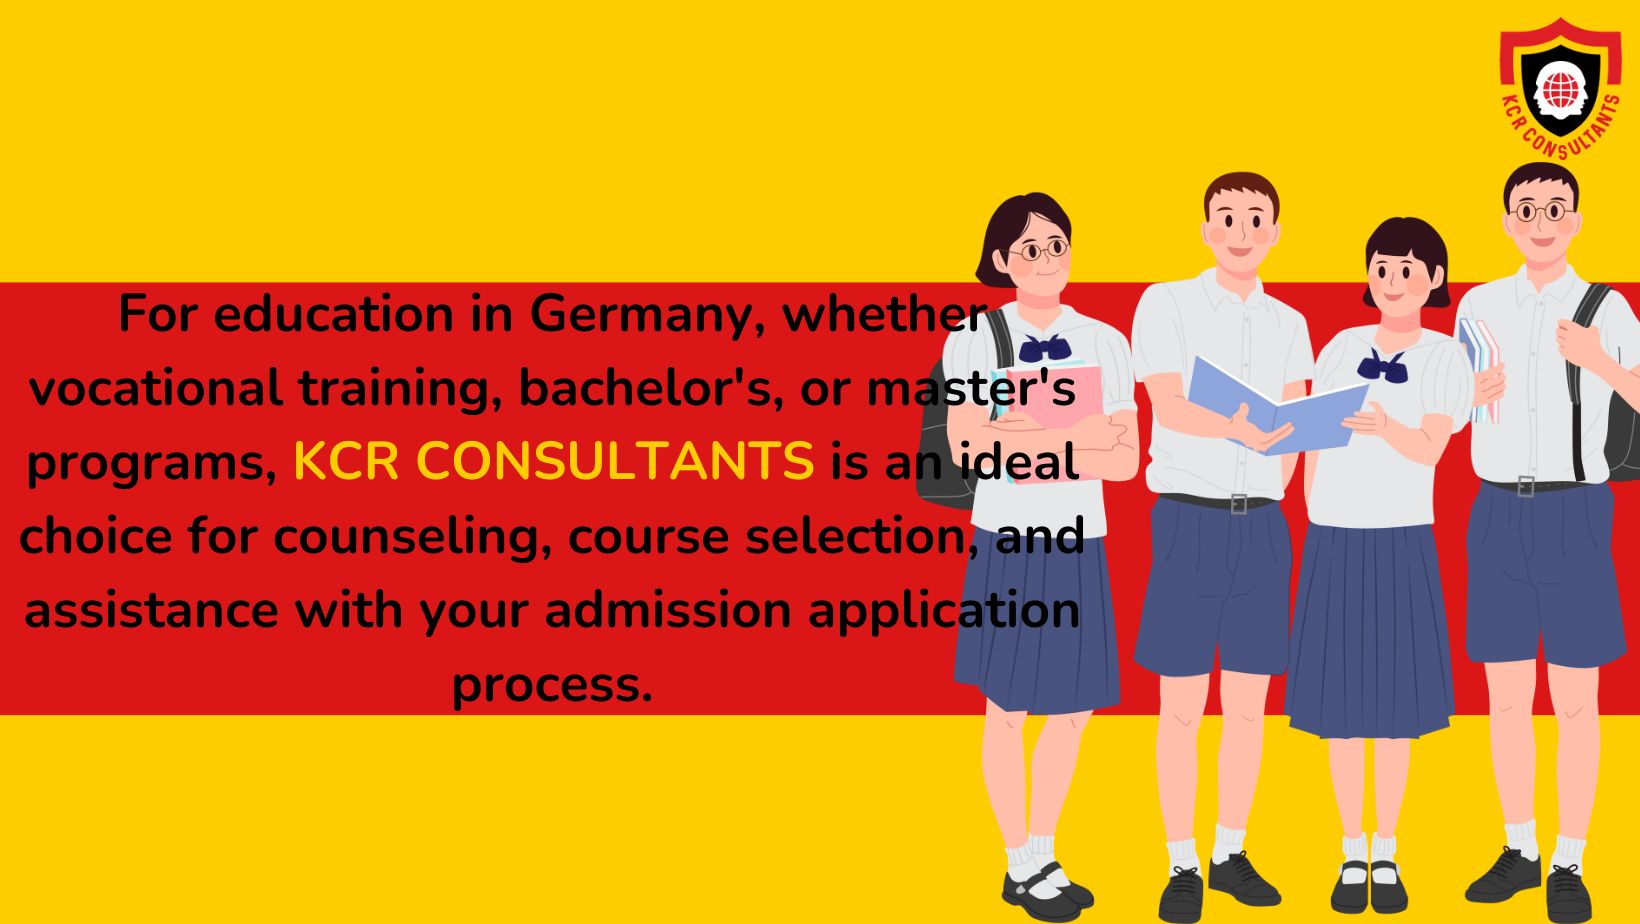 School Education in Germany - KCR CONSULTANTS - Contact us